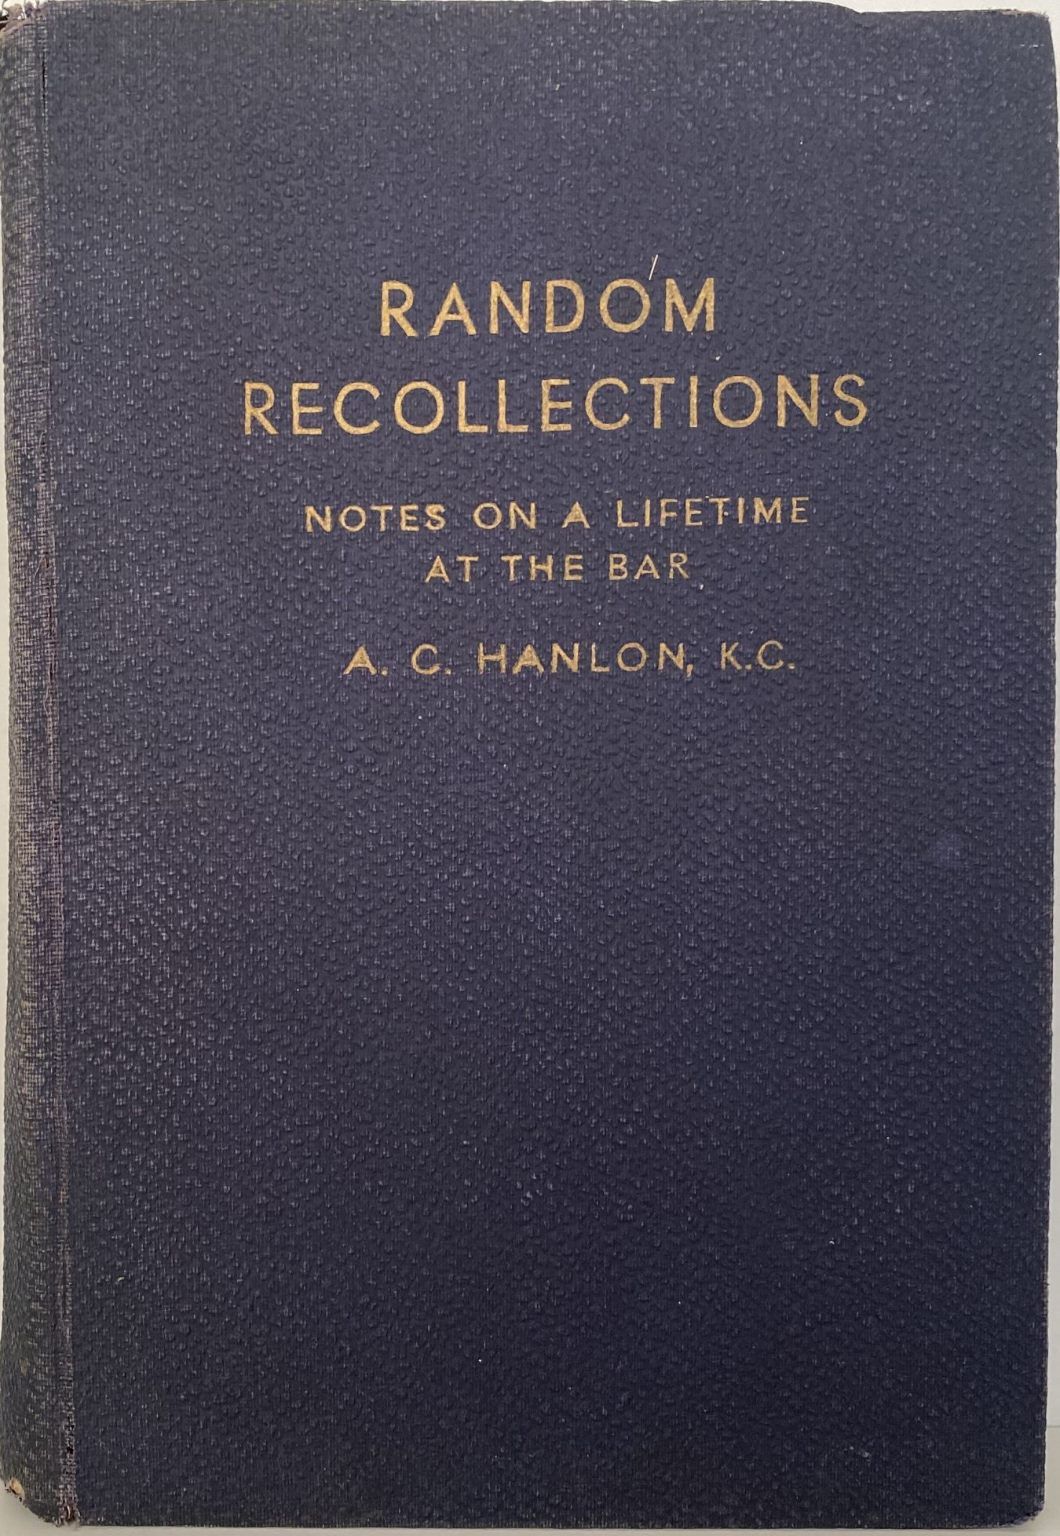 RANDOM RECOLLECTIONS: Notes on a lifetime at the bar